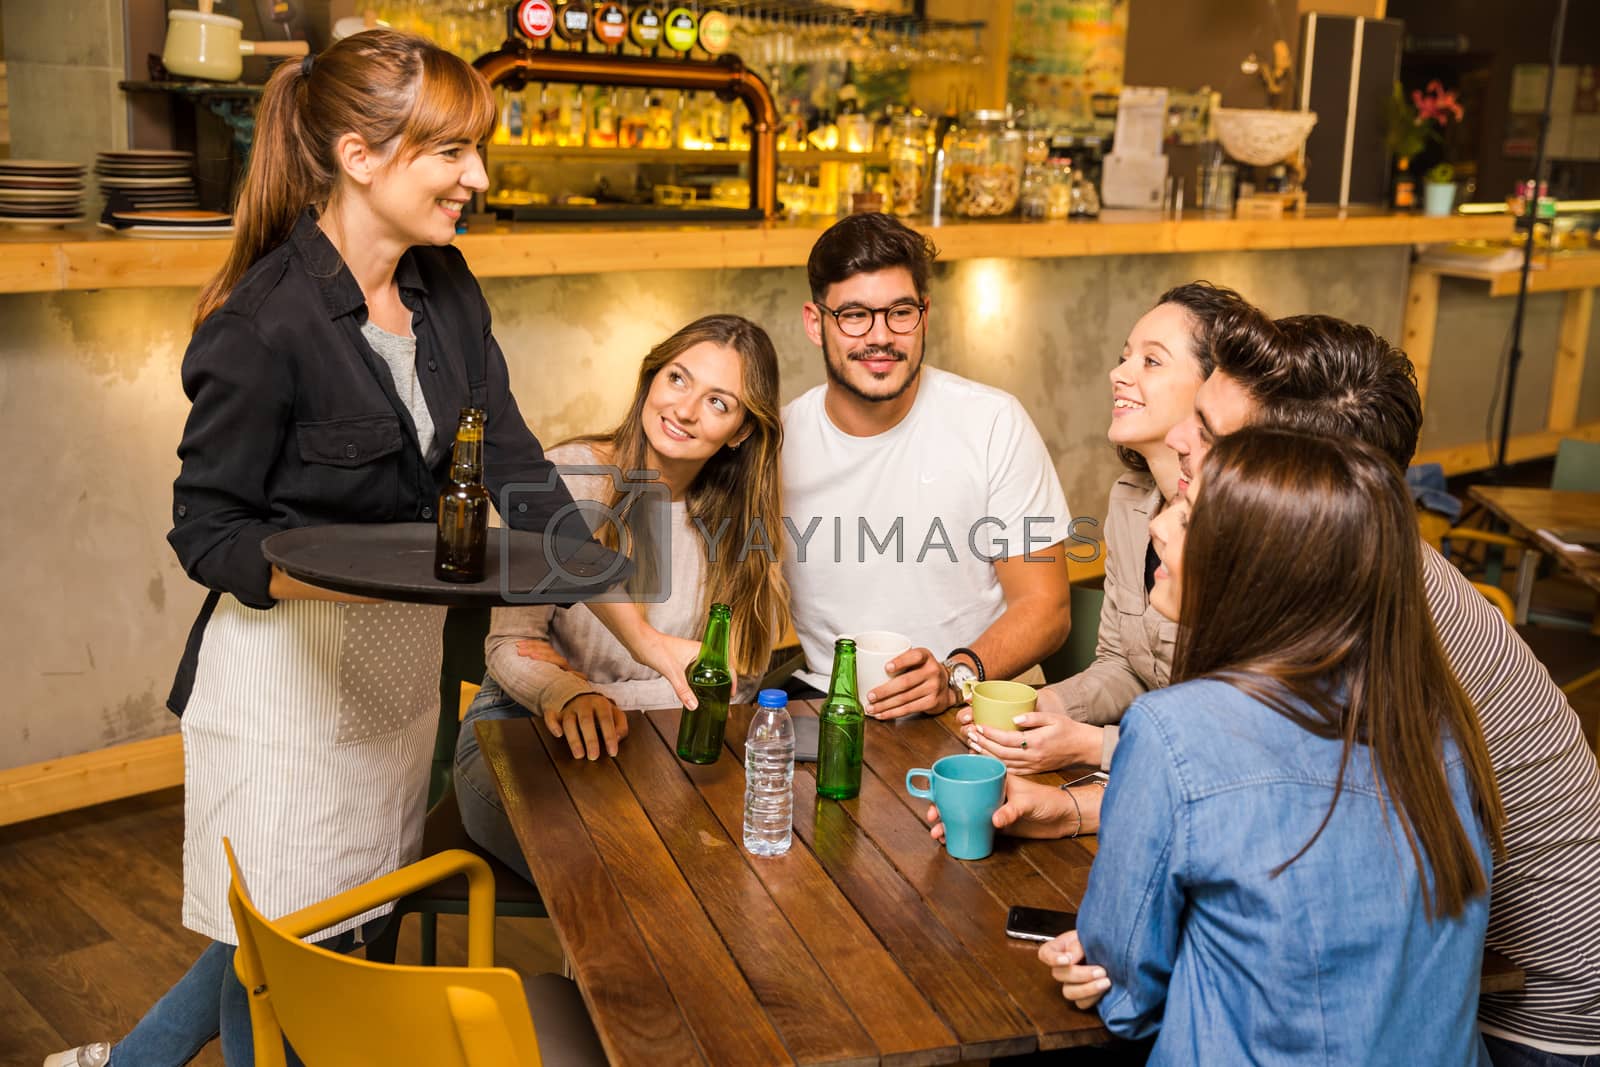 Royalty free image of Talking to the waitress by Iko